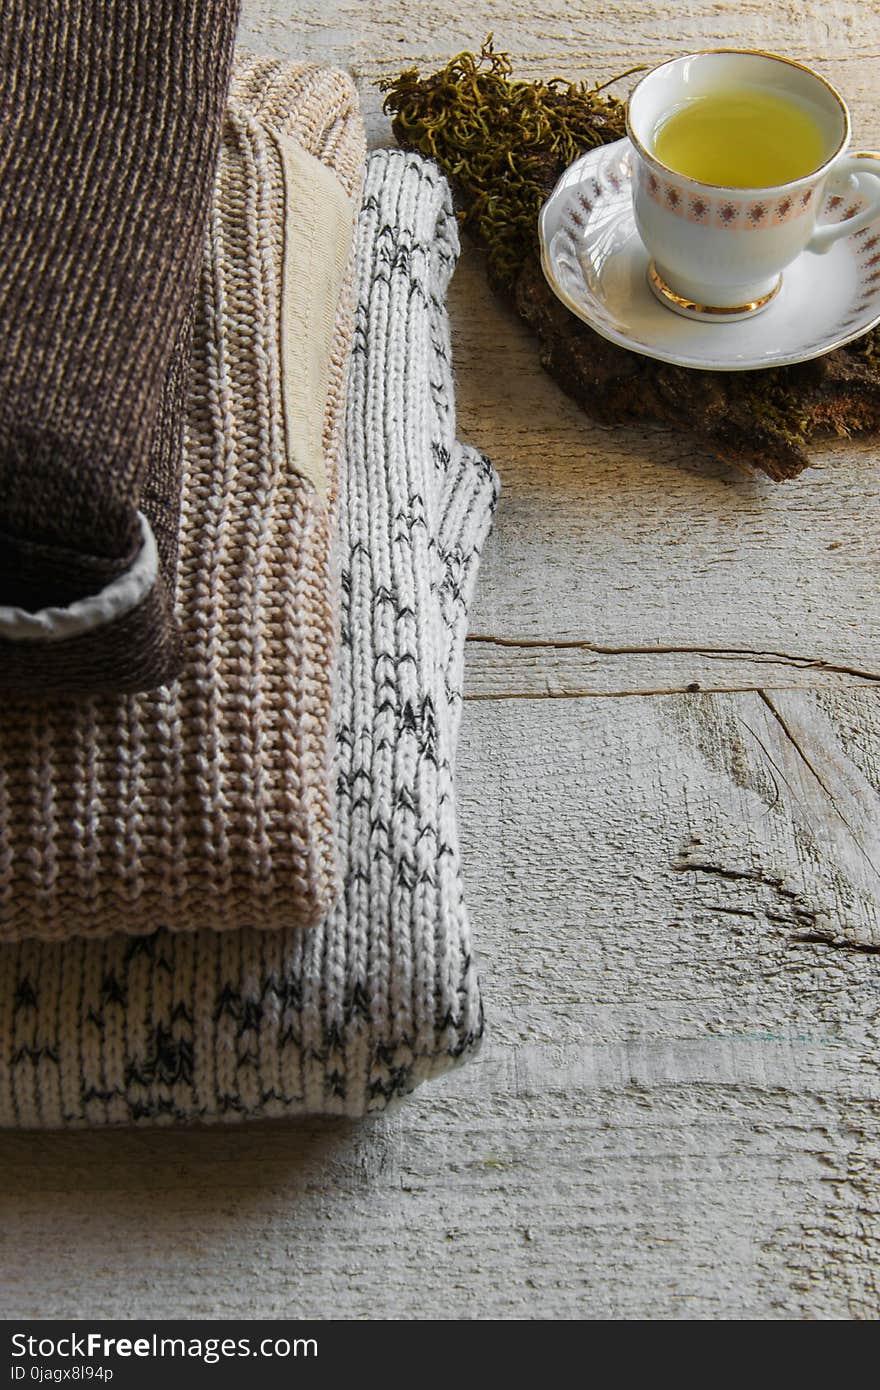 Cozy warm knitted maxi sweaters and cup of tea on wooden background with space for text. Concepts - fashion, comfortable time spent at home, rustic hygge life, relaxing